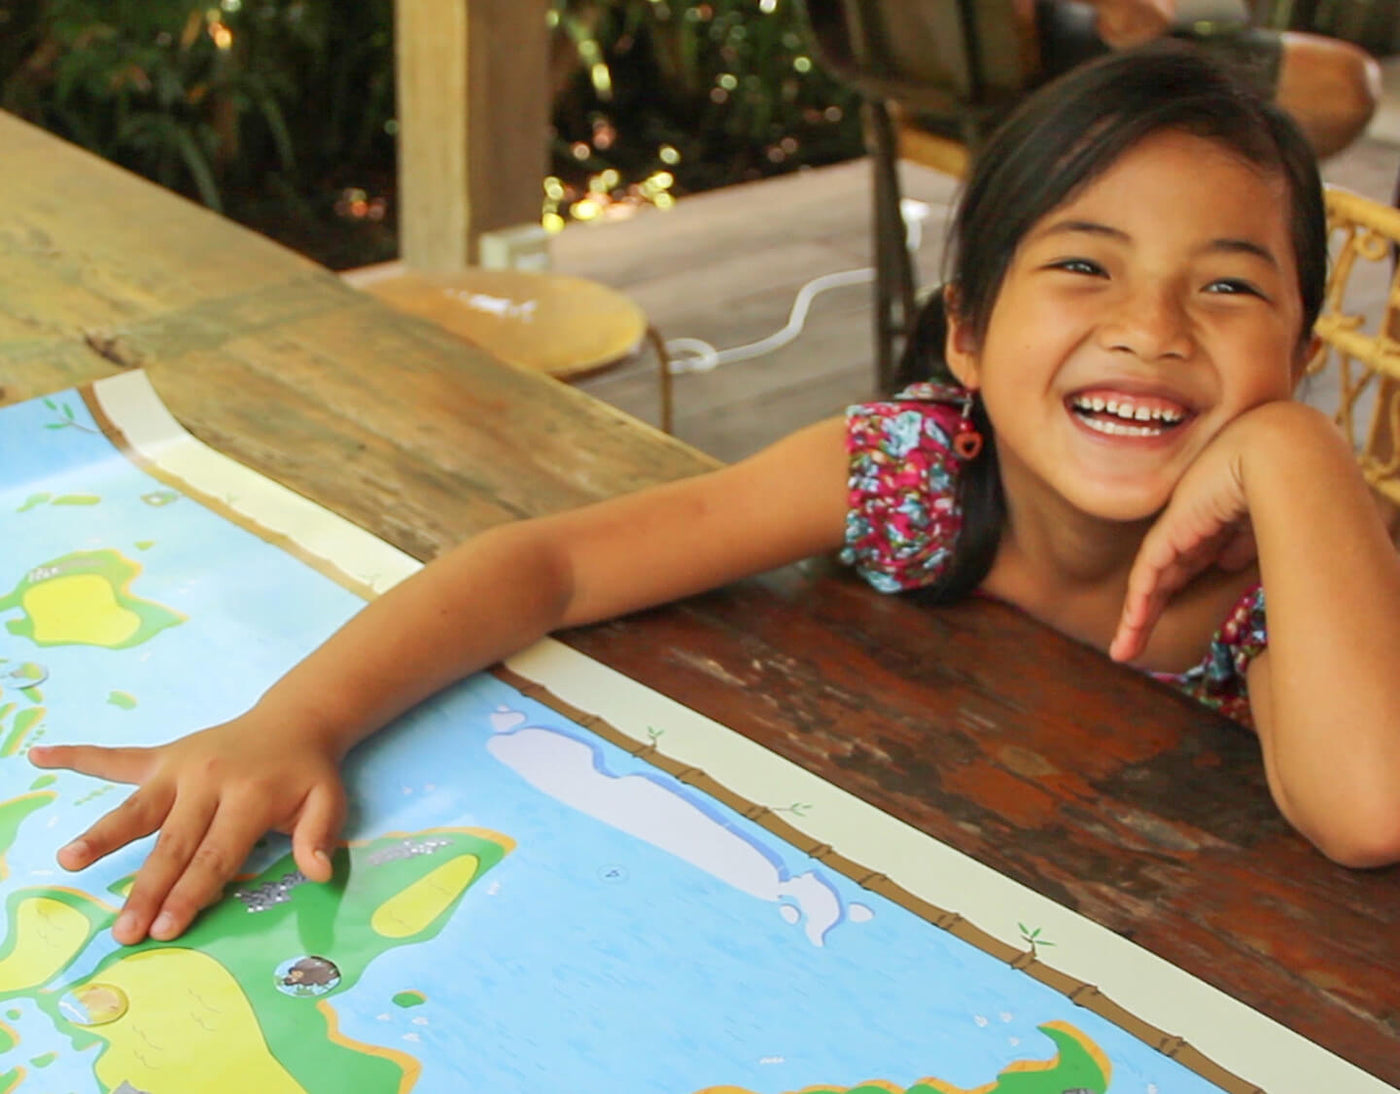 Discover the World with Our Interactive Map - Perfect for Kids